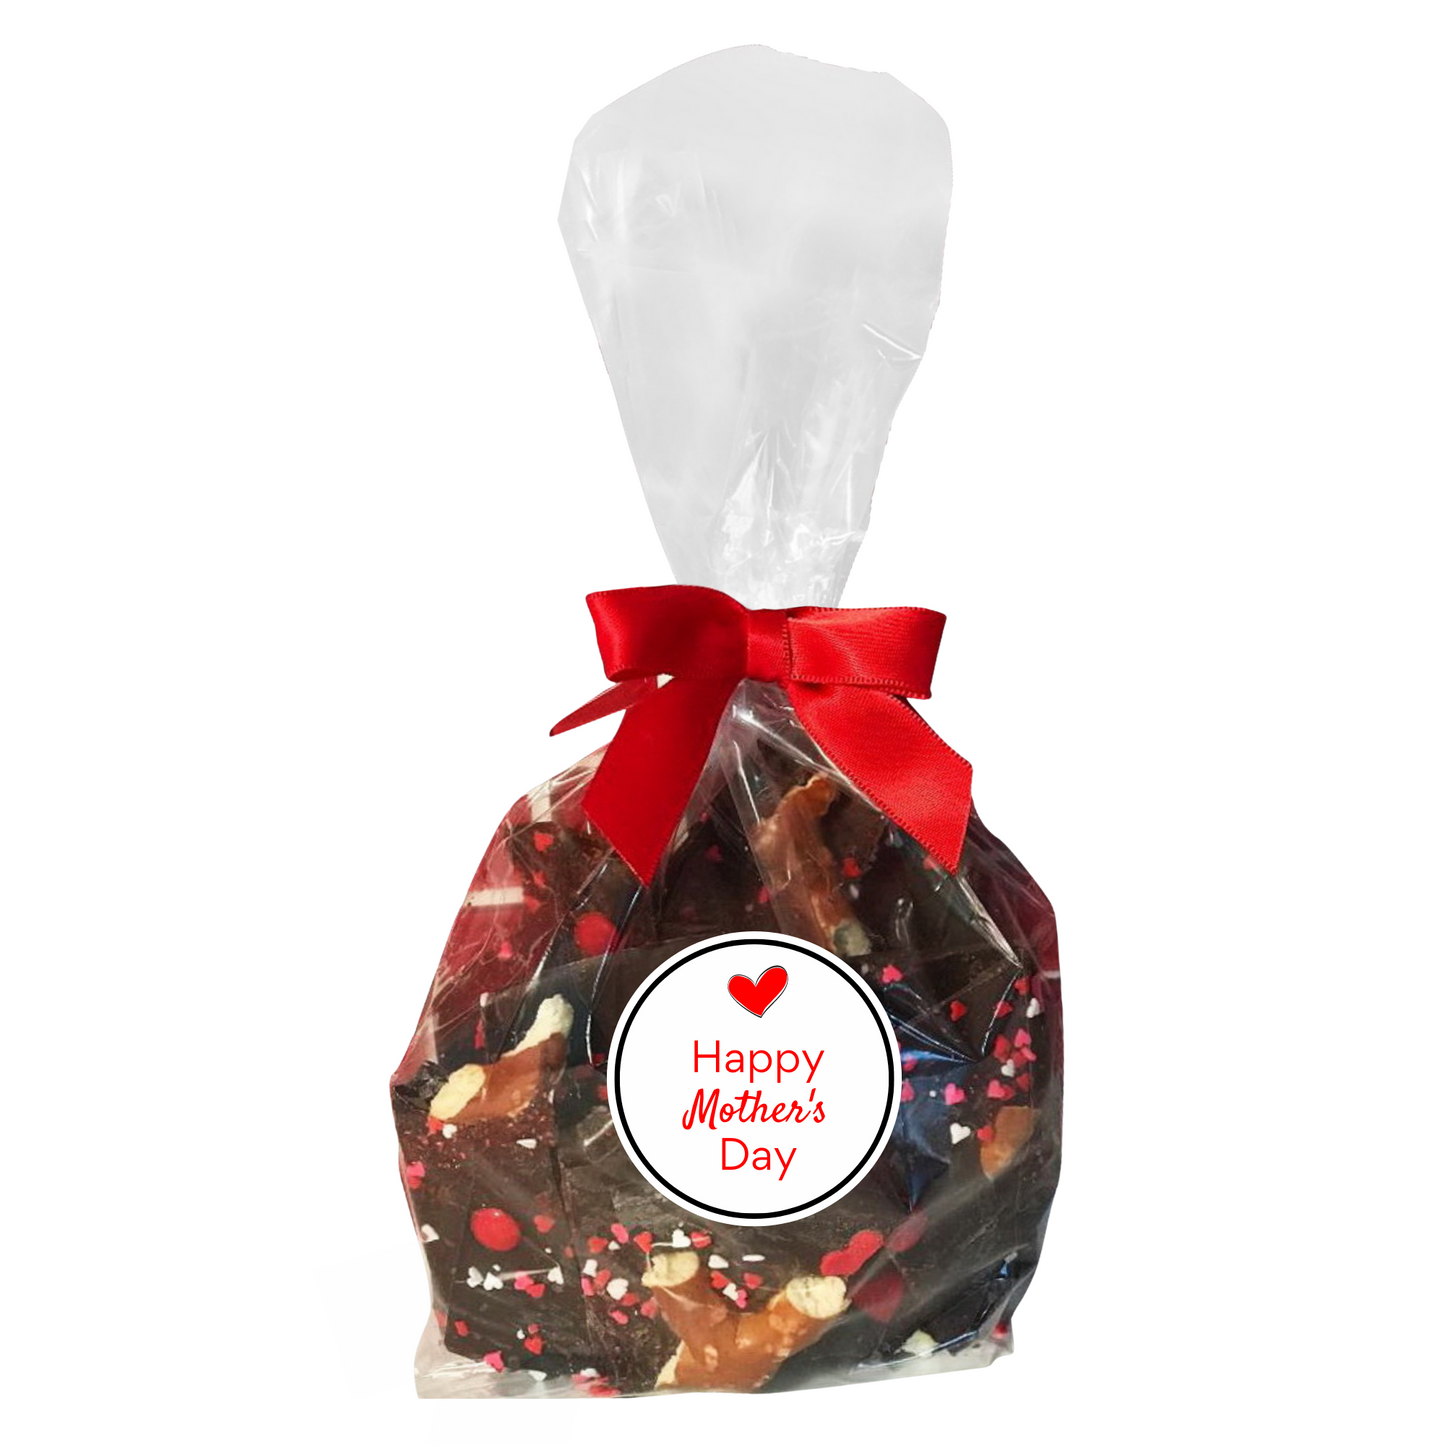 Mother's Day Chocolate Heart Bark